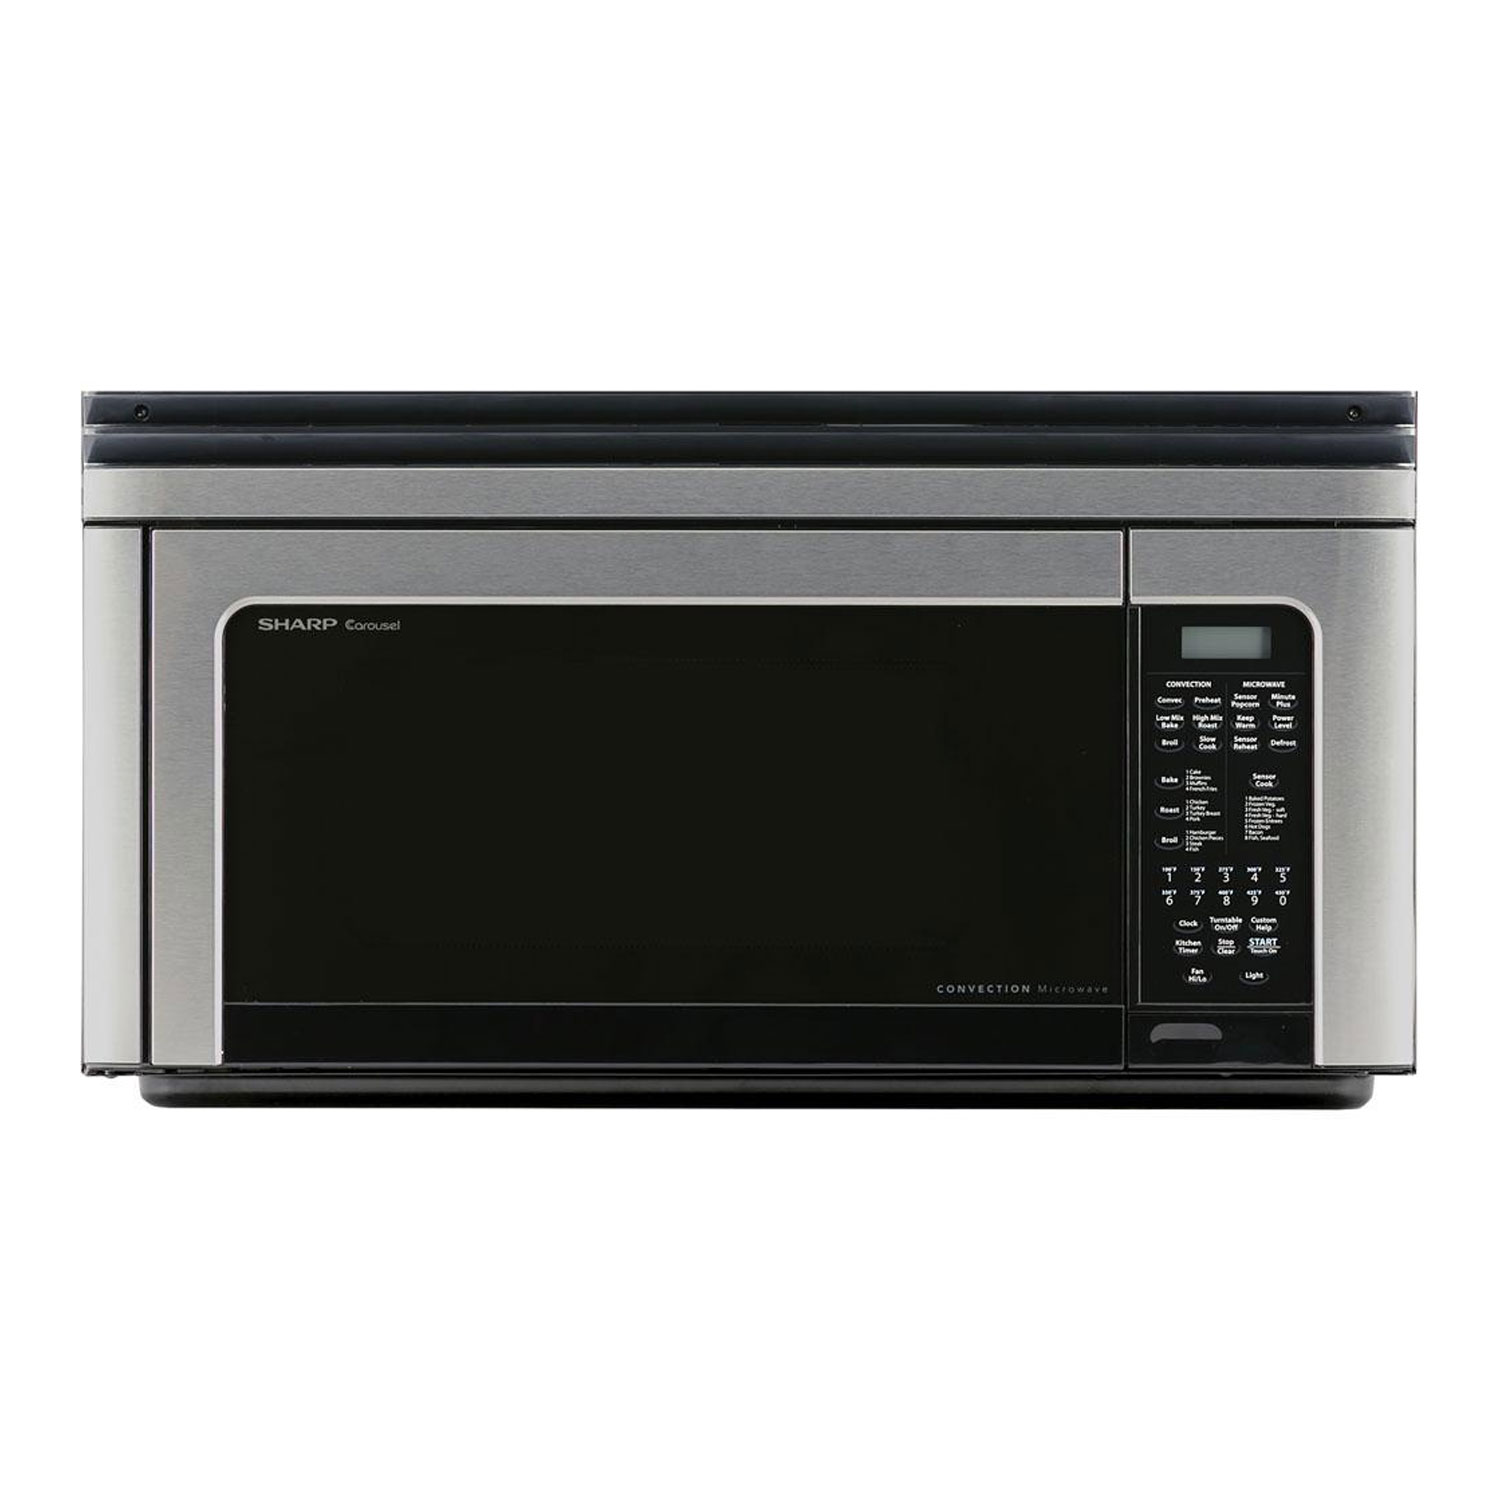 Sharp 1.1 Cubic Feet Convection Over the Range Microwave (Refurbished) eBay